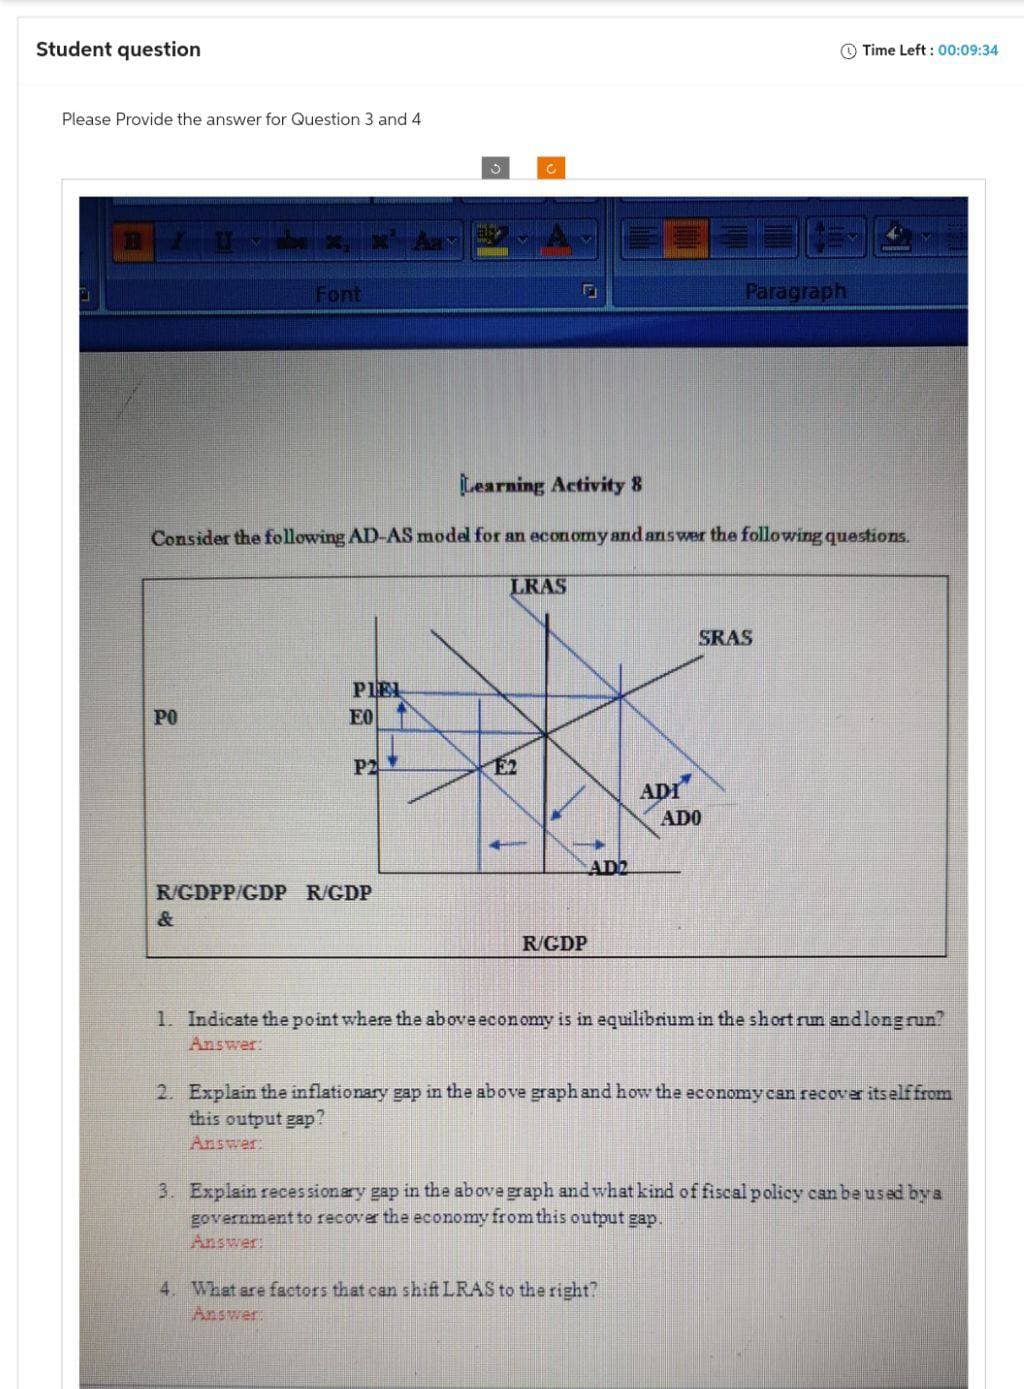 Student question
Please Provide the answer for Question 3 and 4
G
Font
PO
PIEL
EO
P2
3
R/GDPP/GDP R/GDP
C
Learning Activity 8
Consider the following AD-AS model for an economy and answer the following questions.
F
LRAS
R/GDP
AD2
ADI
Paragraph
SRAS
ADO
4. What are factors that can shift LRAS to the right?
Answer:
Time Left: 00:09:34
1. Indicate the point where the above economy is in equilibrium in the short run and long run?
Answer:
2. Explain the inflationary gap in the above graph and how the economy can recover itself from
this output gap?
Answer:
3. Explain recessionary gap in the above graph and what kind of fiscal policy can be used by a
government to recover the economy from this output gap.
Answer: